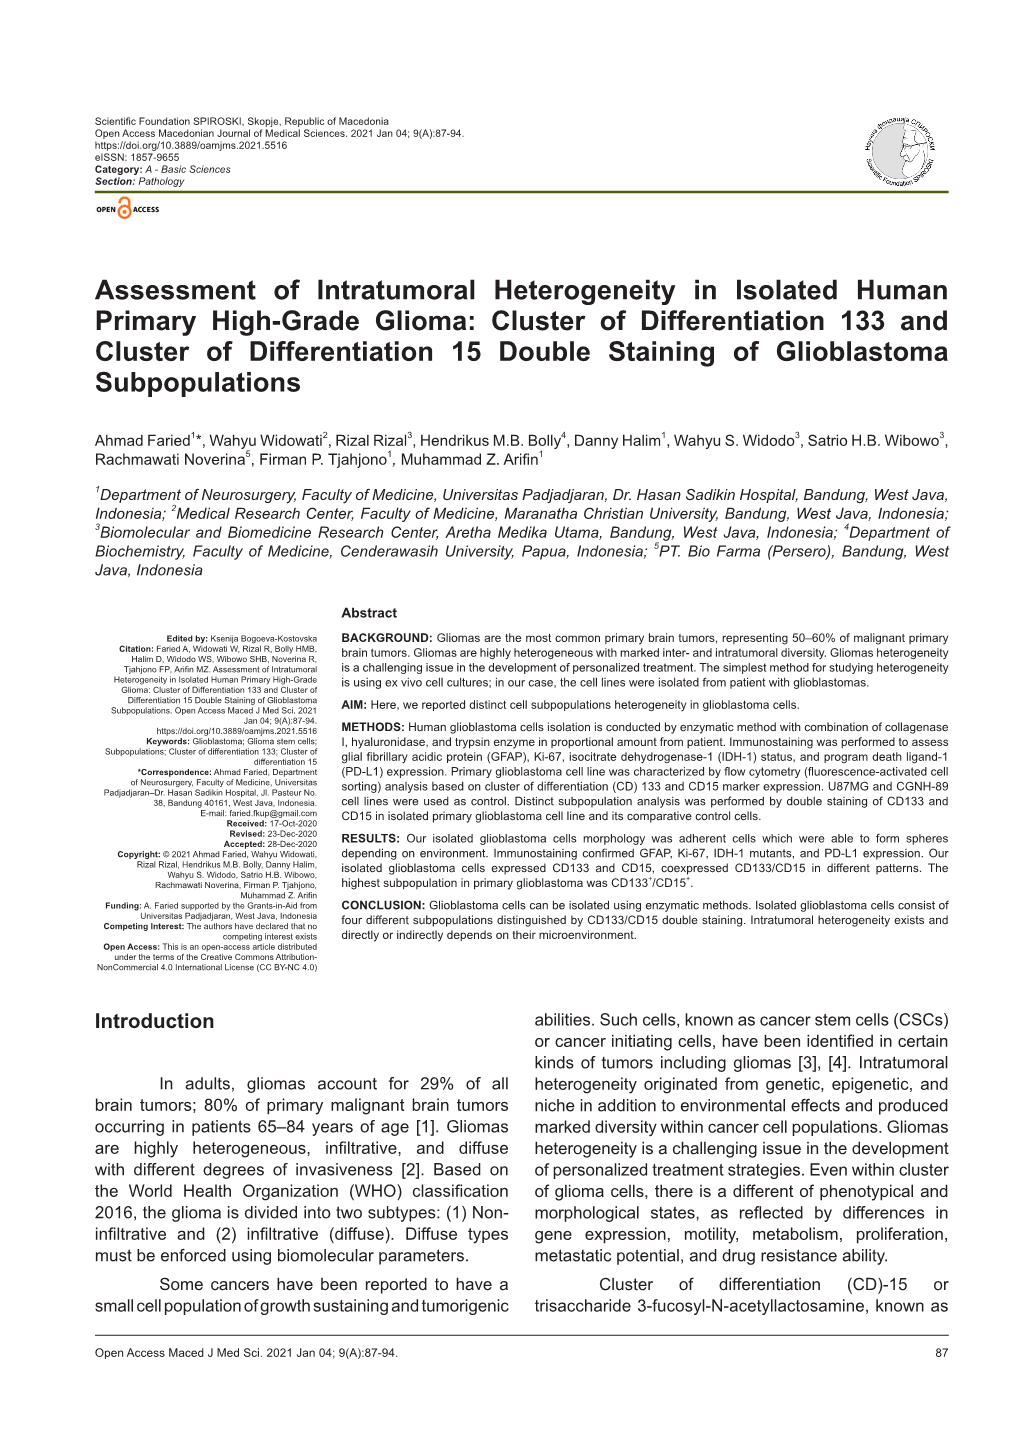 Assessment of Intratumoral Heterogeneity in Isolated Human